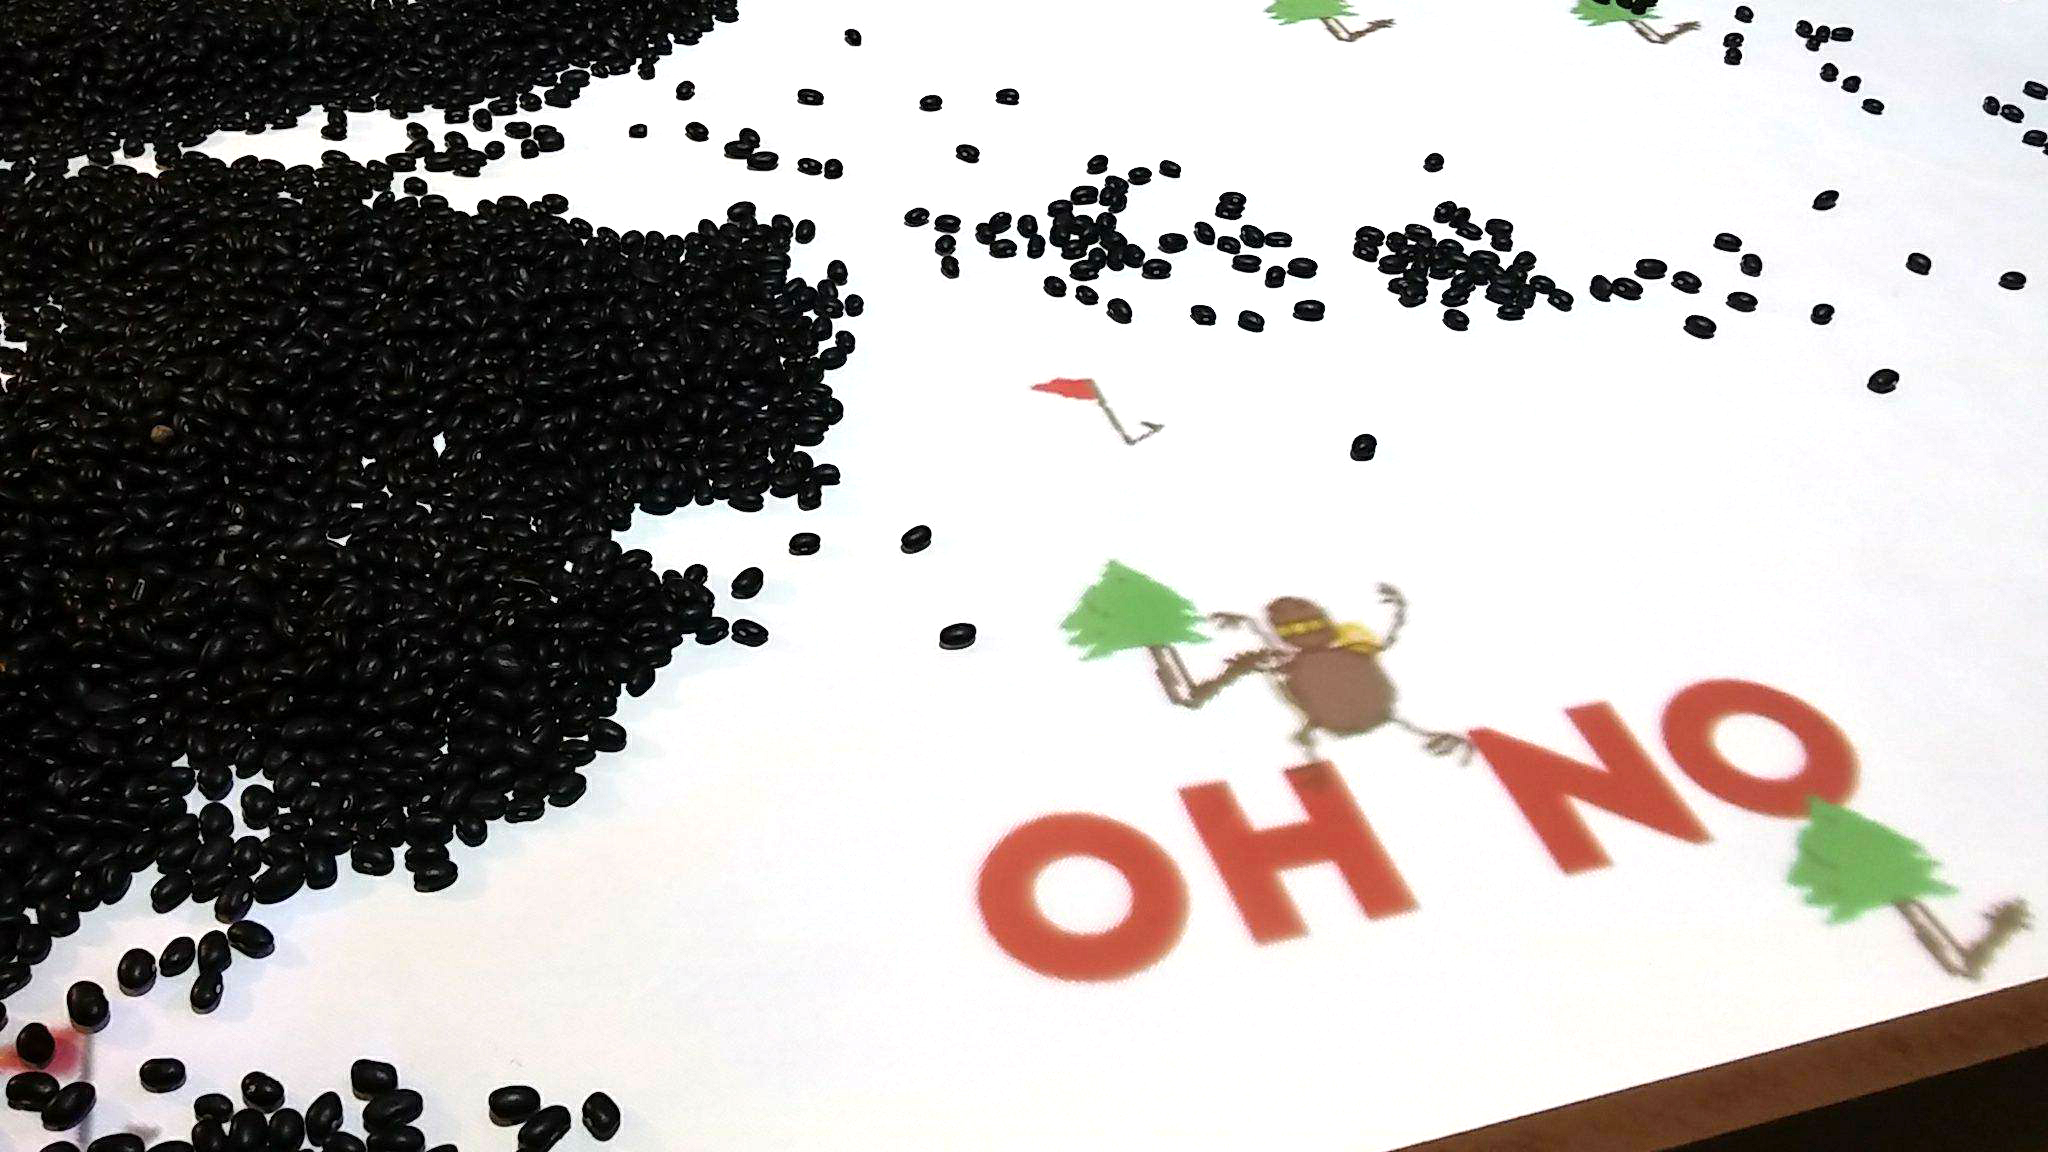 A game controlled by scattered black beans.